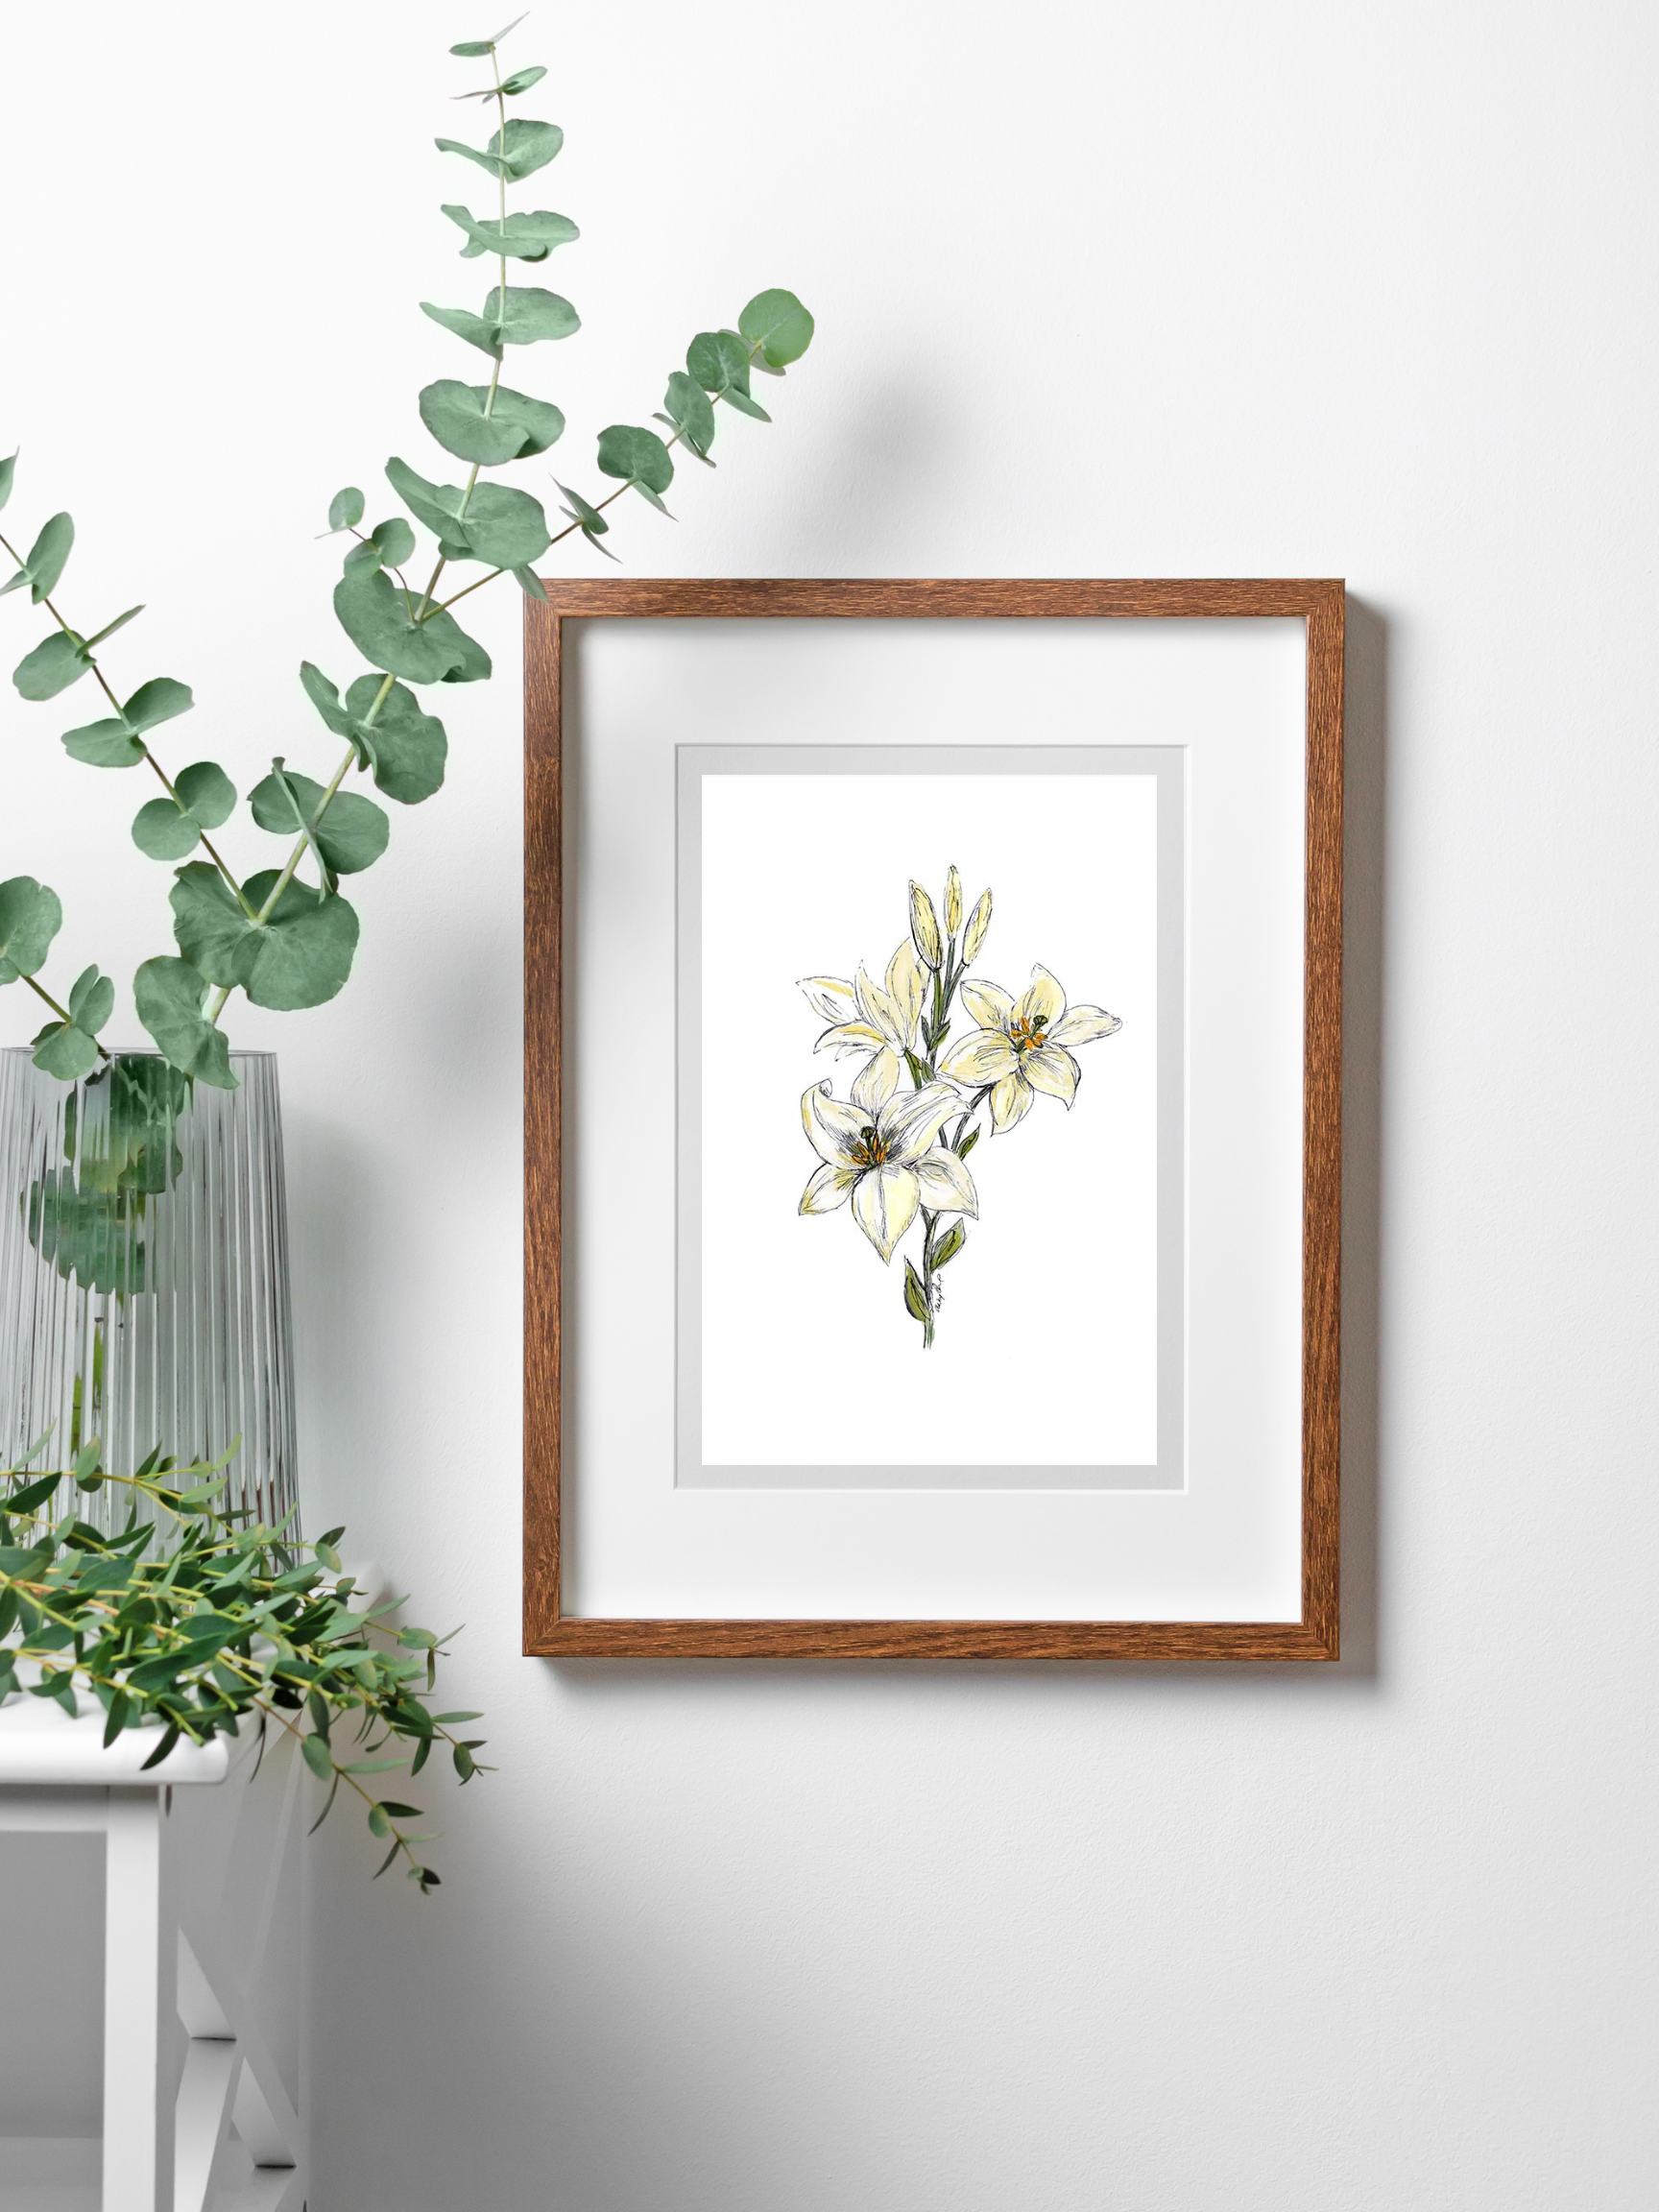 daylily art print in wood frame on wall